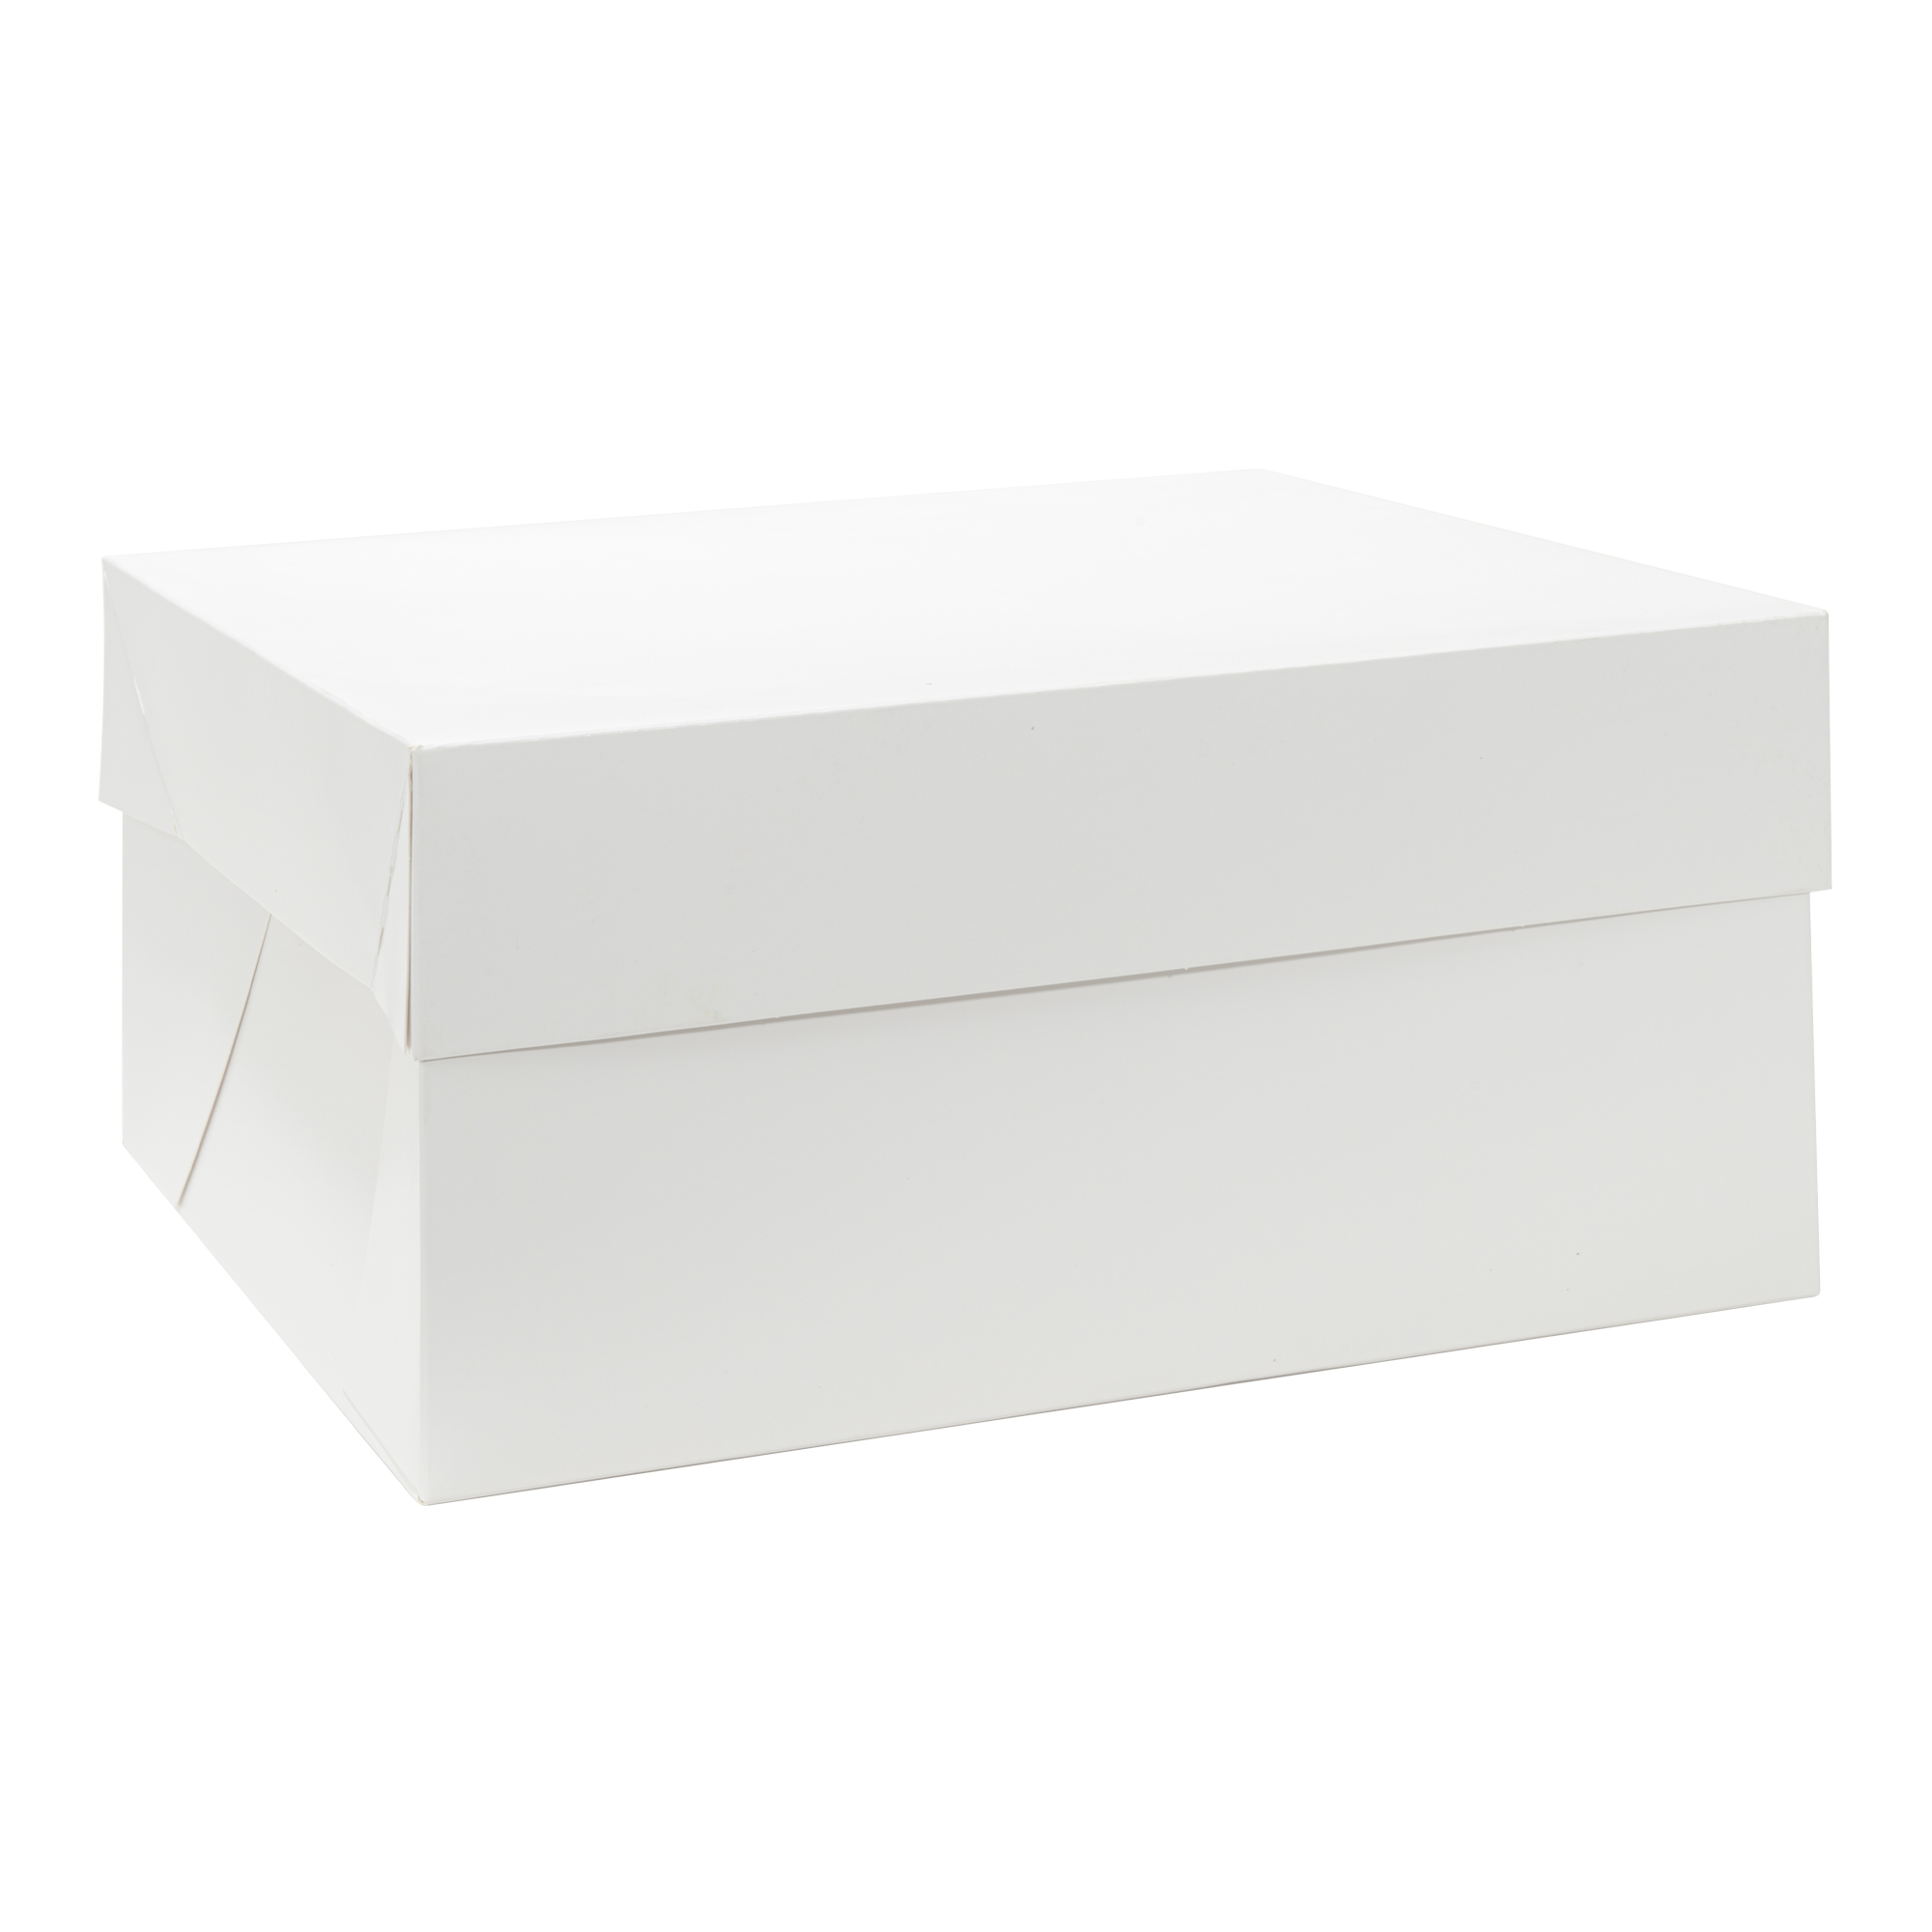 2-Piece Bakery Box With Lid 10" 25pc/pack - White